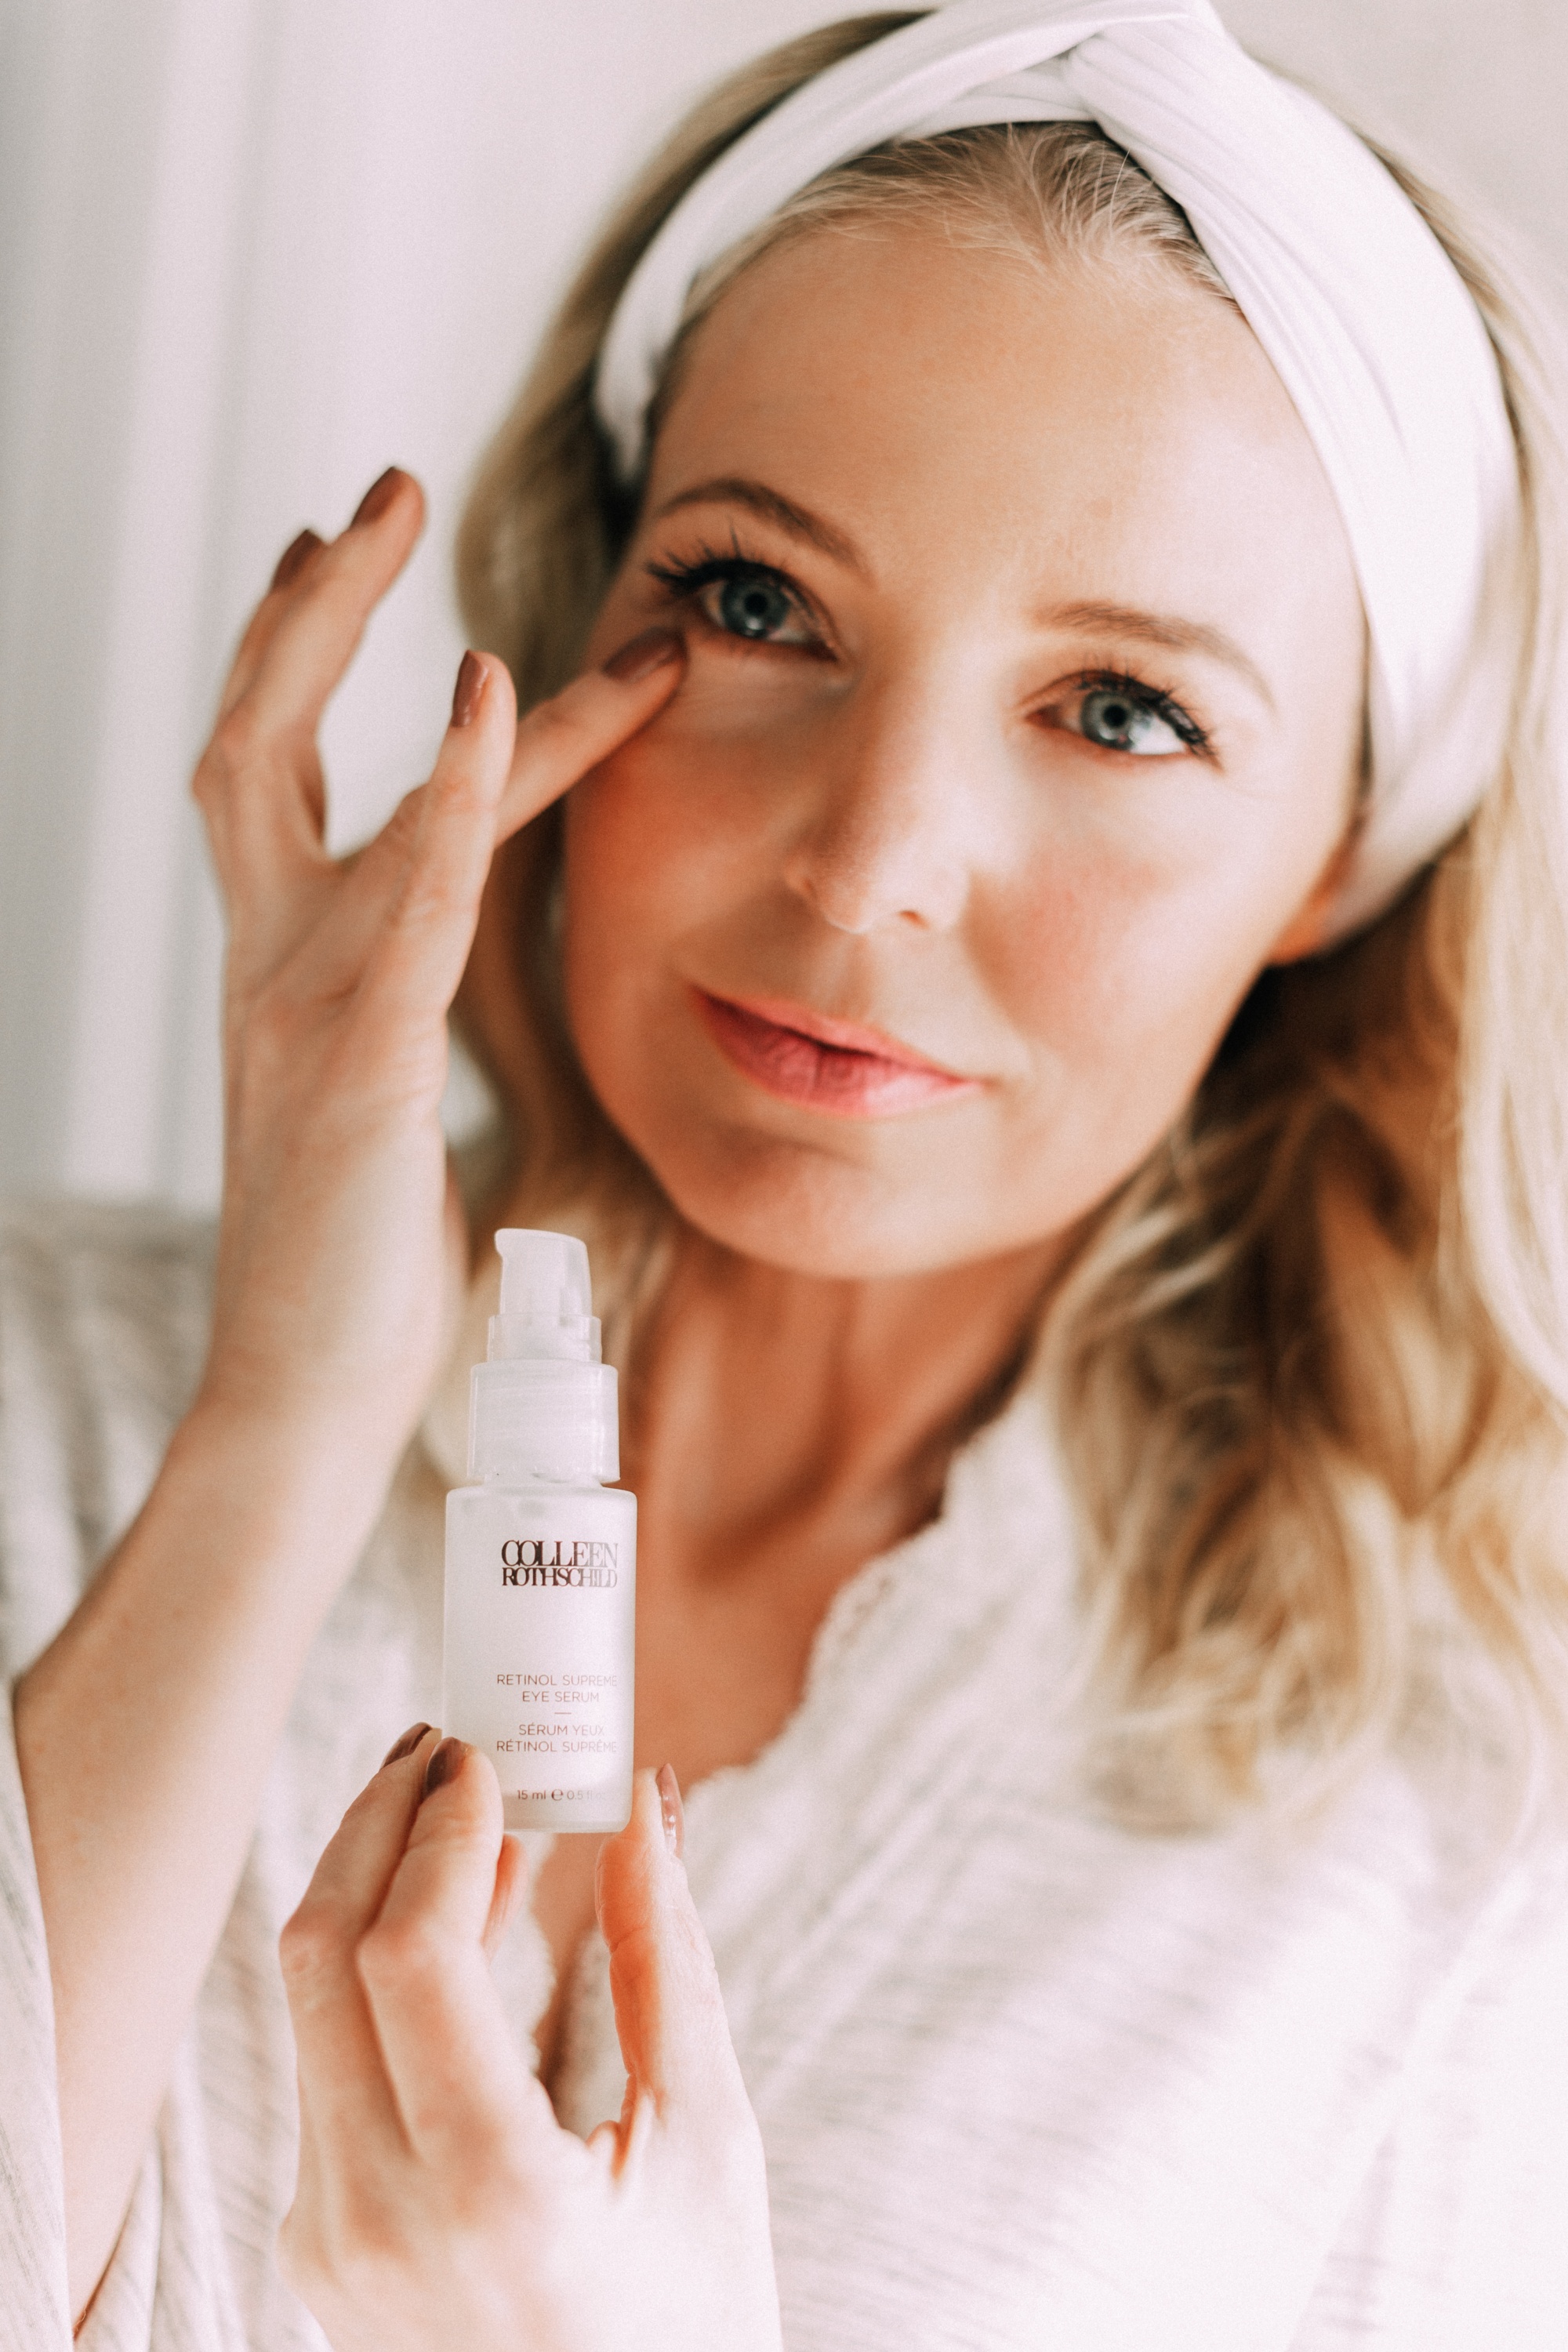 Anti-Aging Treatments, Fashion blogger Erin Busbee of BusbeeStyle.com sharing her secrets to anti-aging including products from Colleen Rothschild like the Retinol Supreme Eye Serum